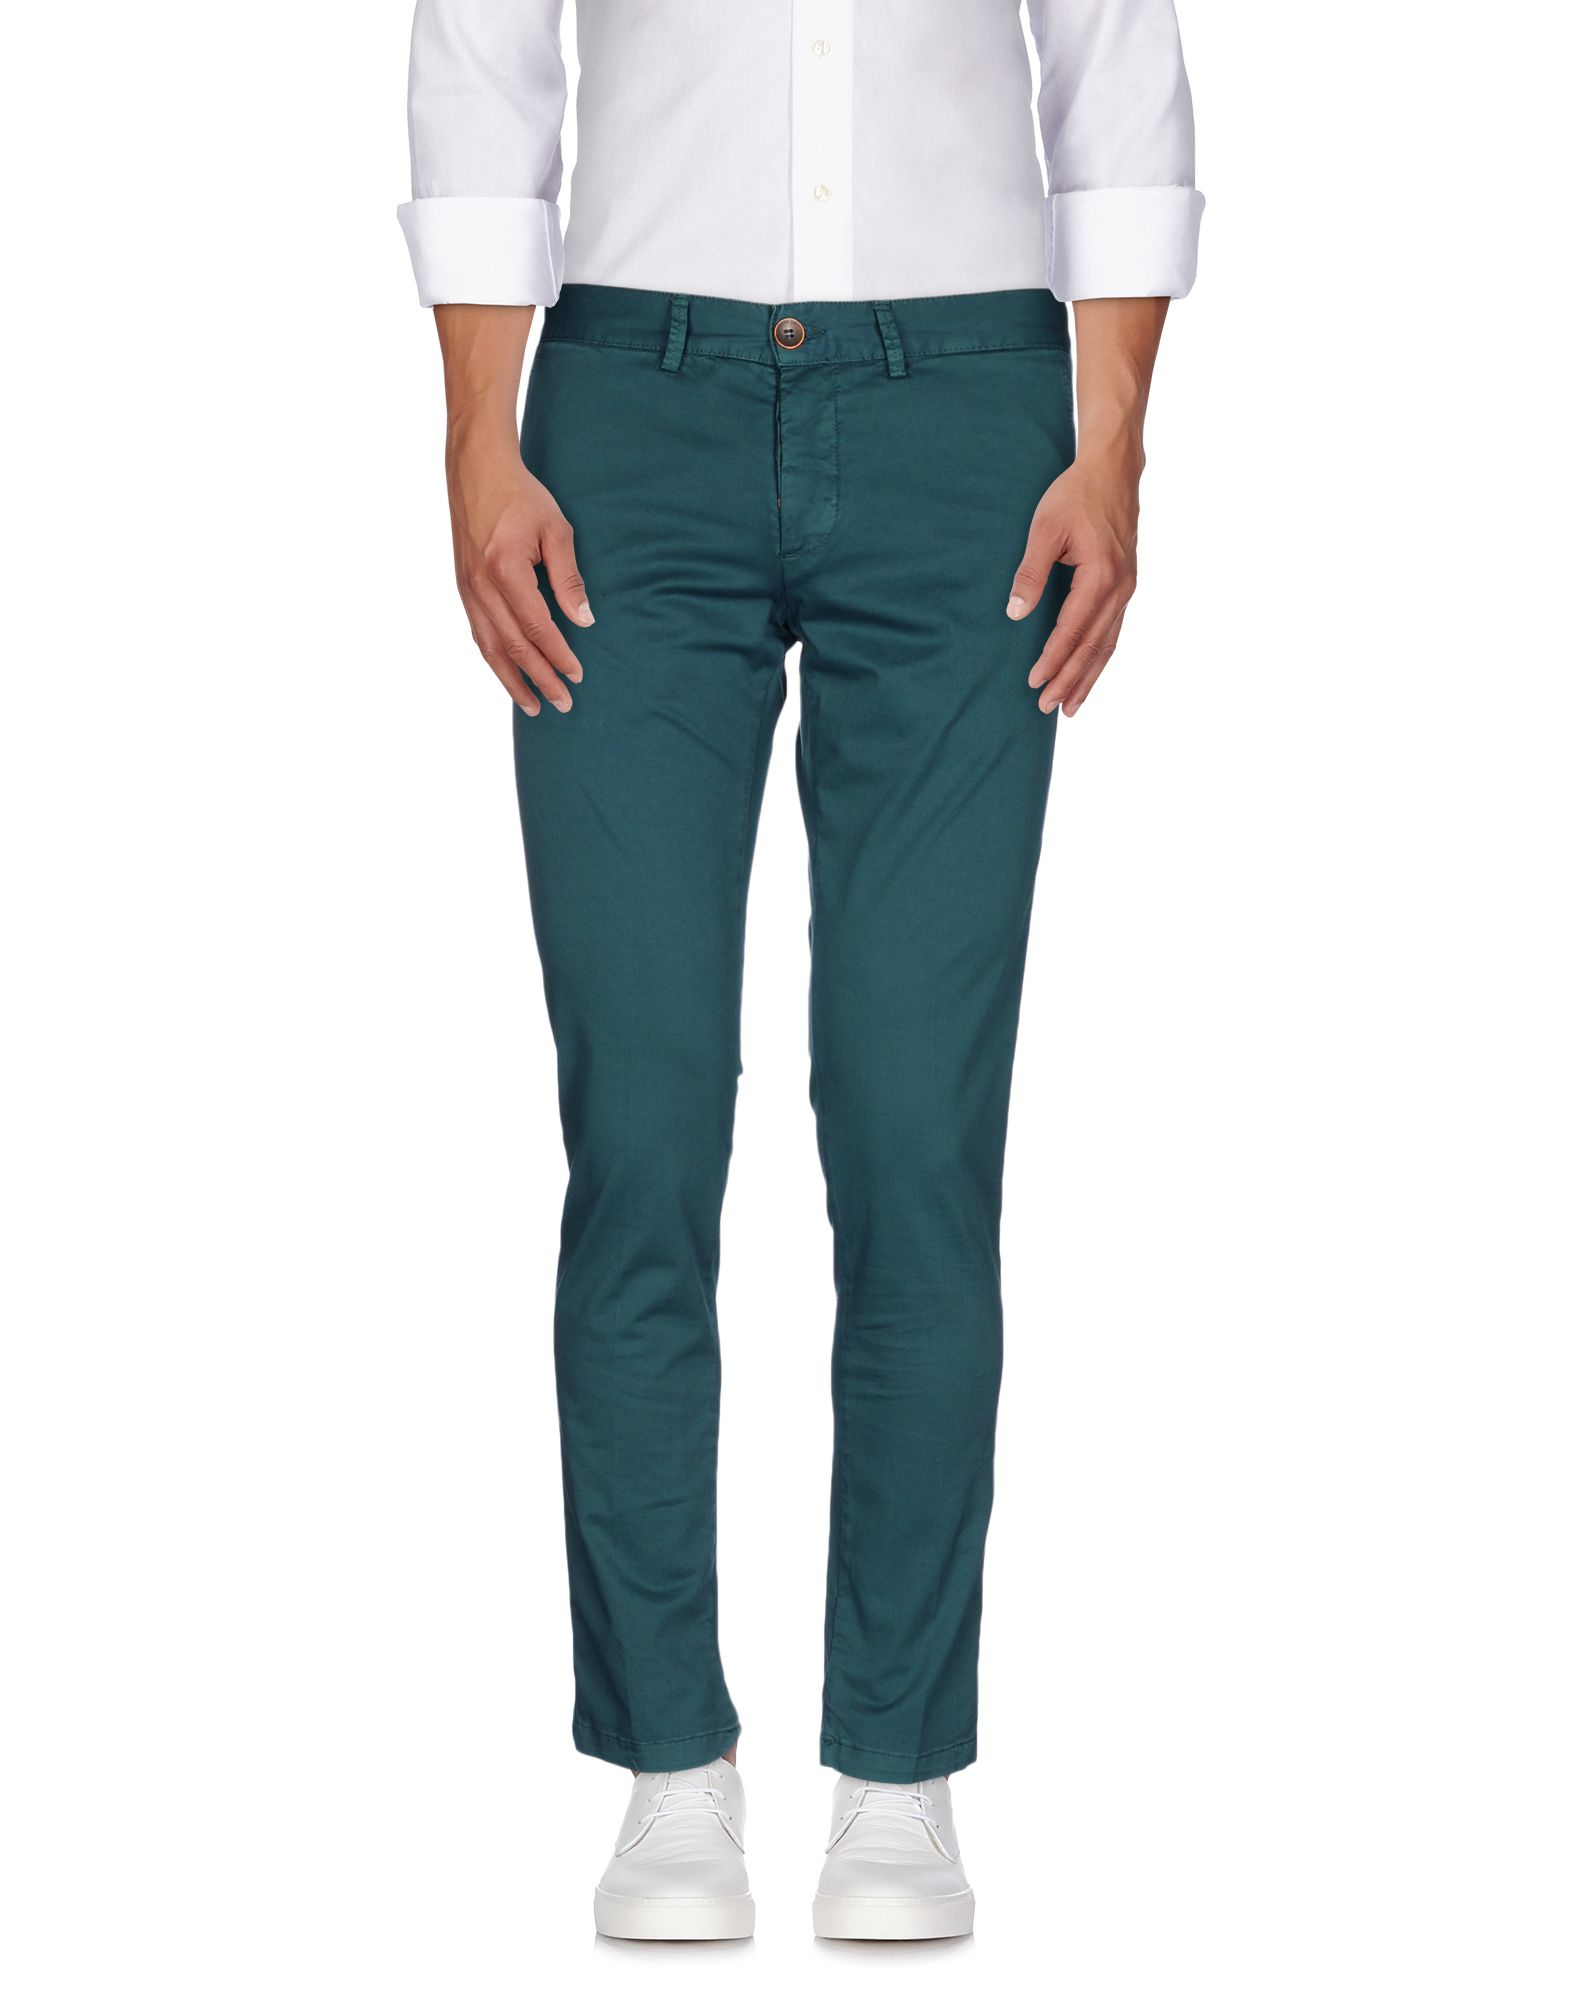 Basicon Casual Trouser in Teal for Men (Deep jade) - Save 64% | Lyst